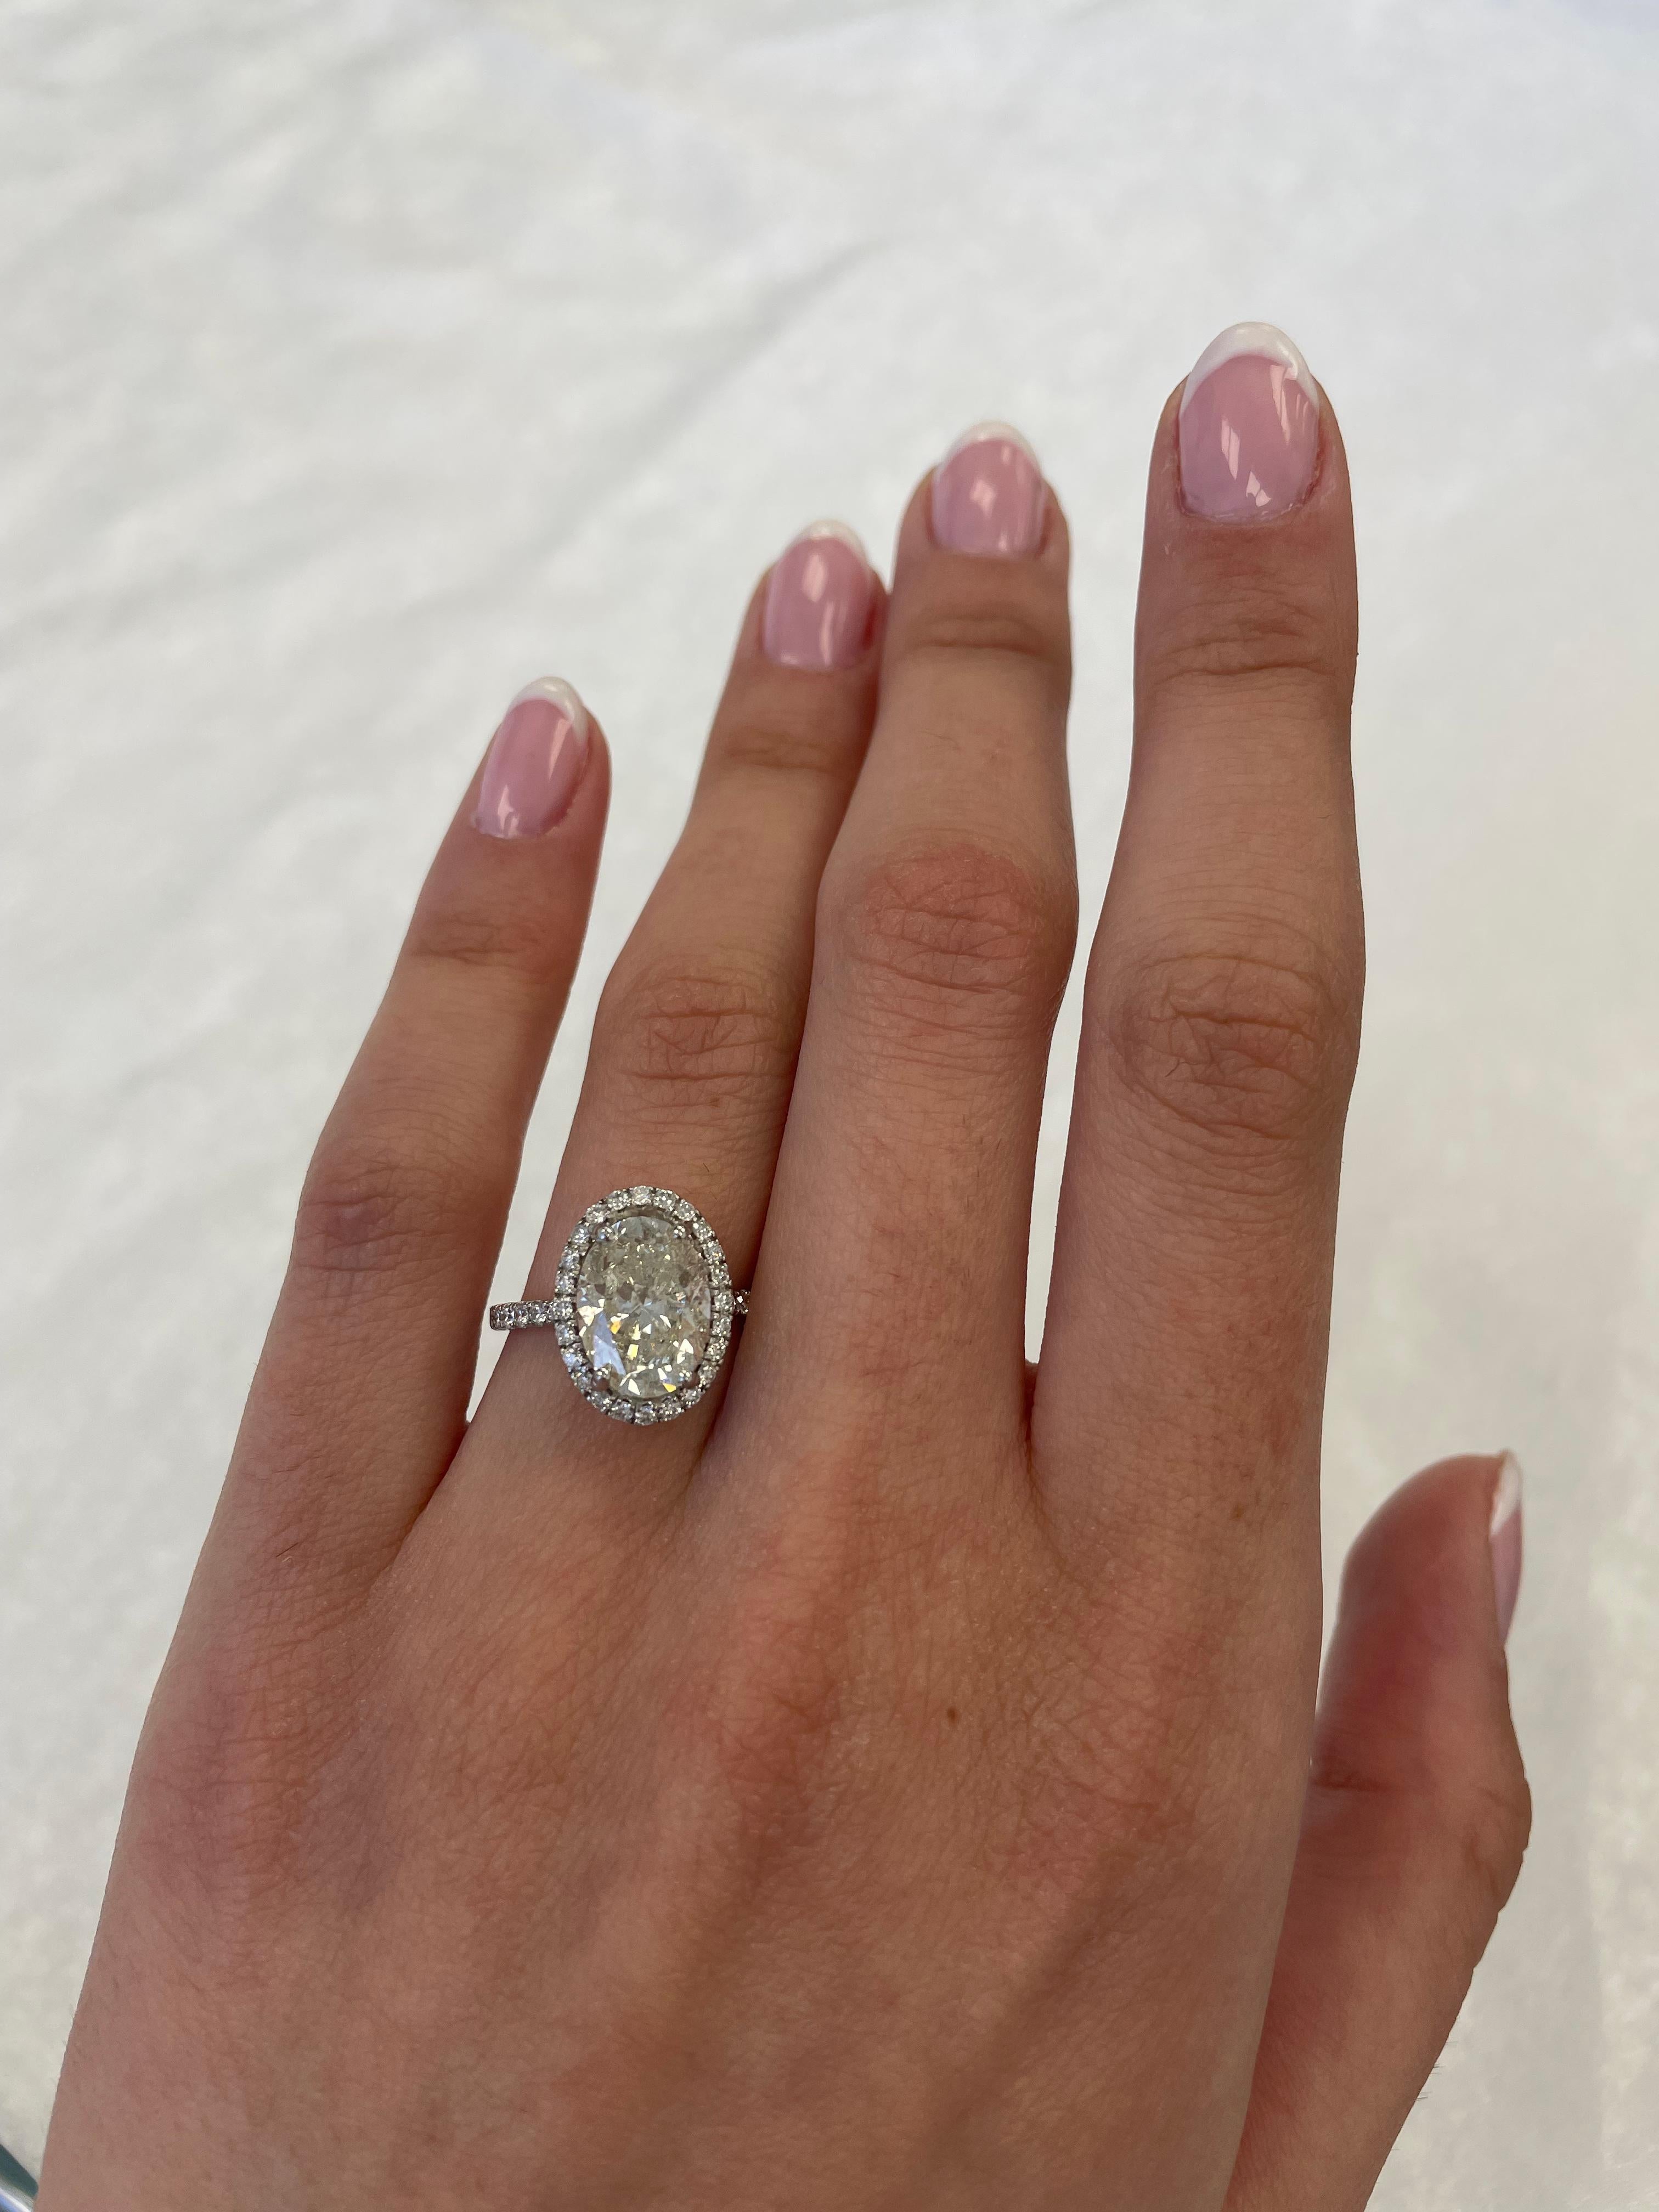 Classic diamond with halo engagement ring with diamonds down the shank.
3.82 carats total diamond weight.
3.26 carat oval diamond, EGL certified I/J color grade and SI3 clarity grade. Complimented by 0.56 carats of round brilliant diamonds,